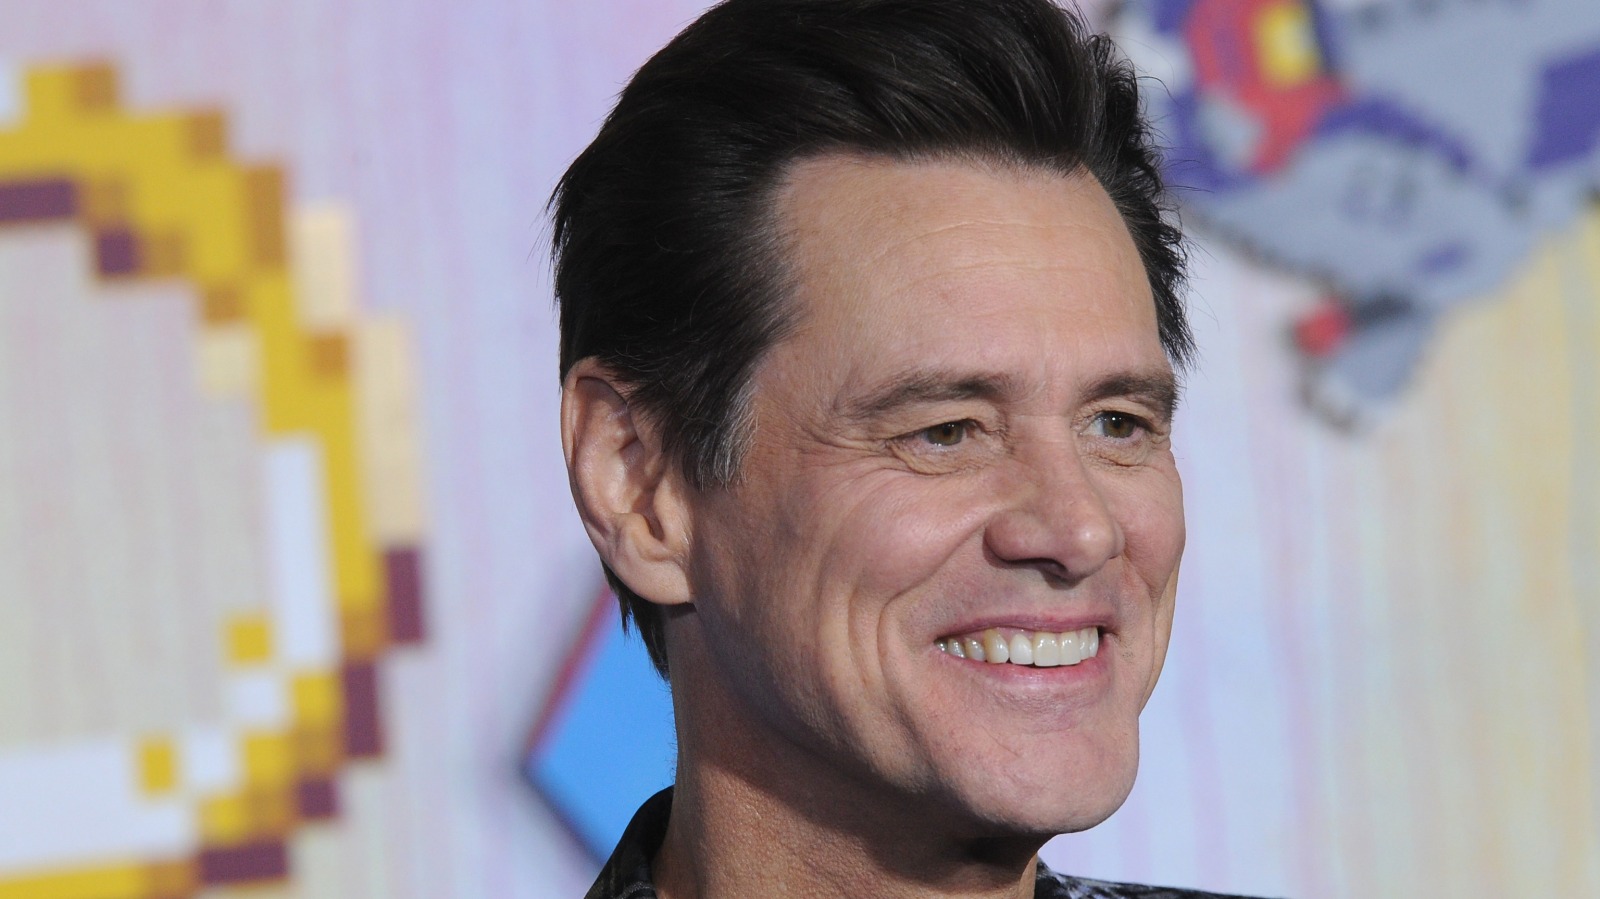 Jim Carrey Forgets Love and Blue Hair: The Tragic Story of a Hollywood Star - wide 6